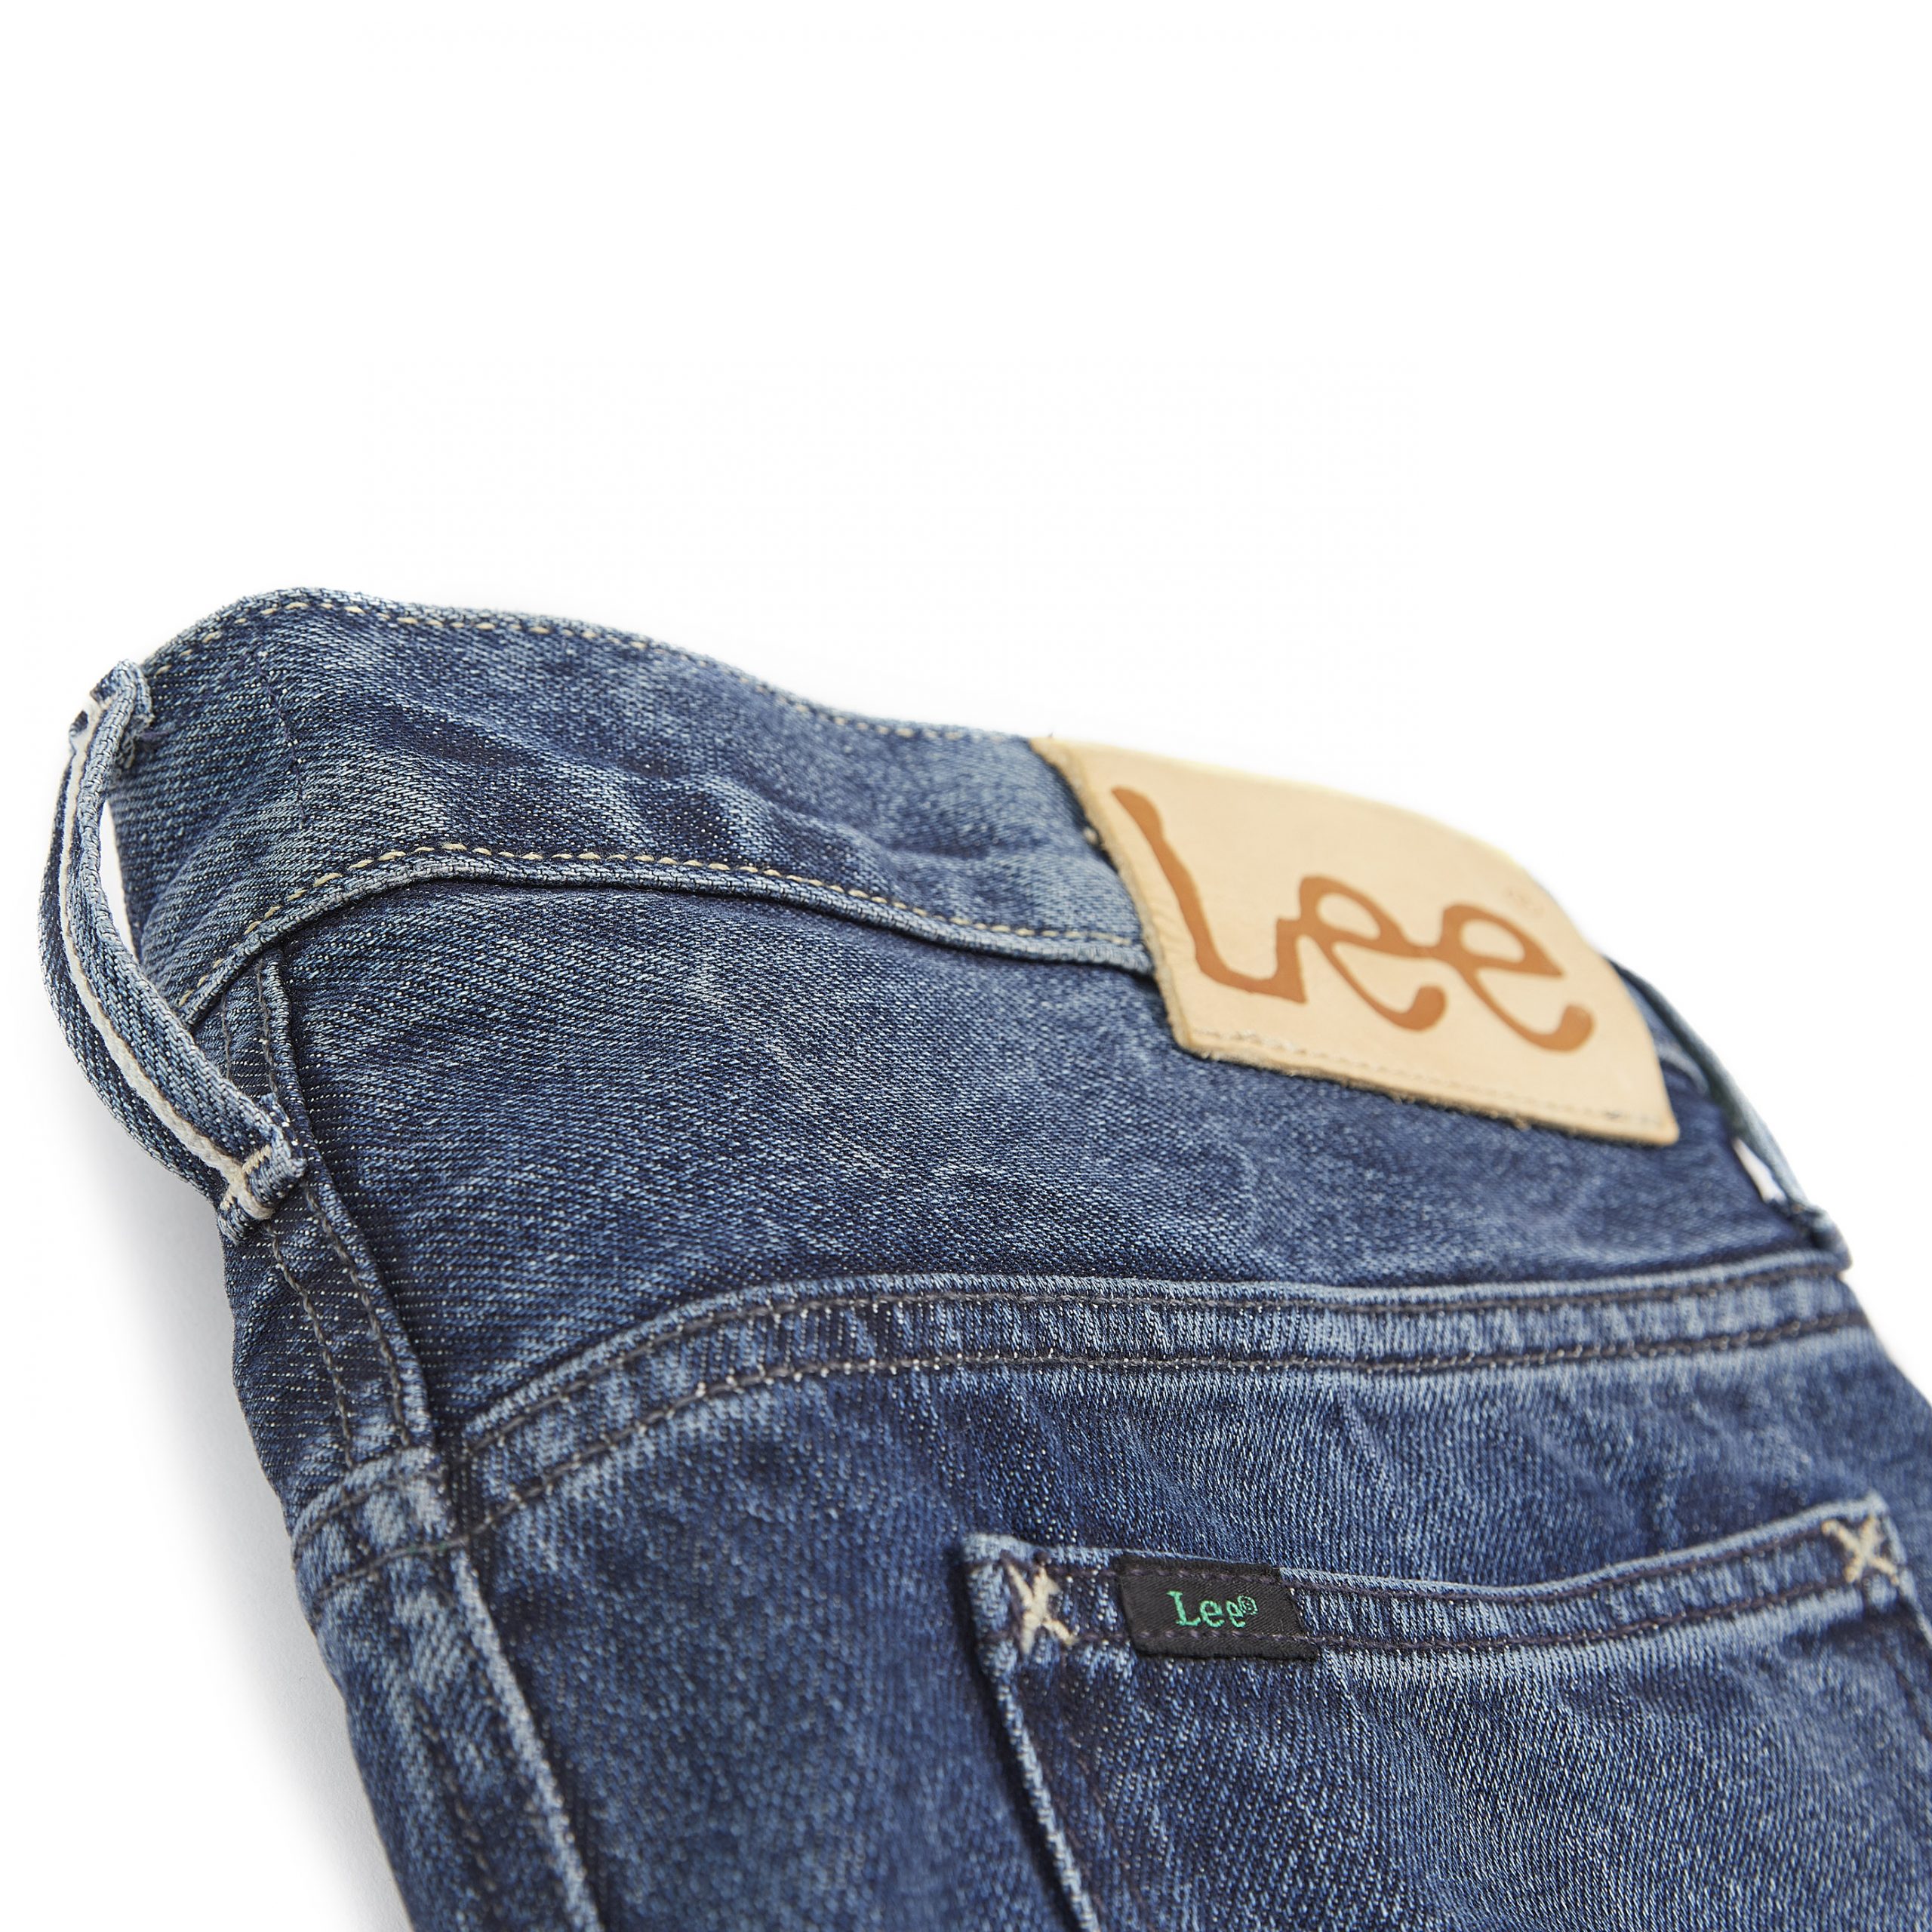 Lee Jeans introduces 'For A World That Works' Initiative - Denimandjeans |  Global Trends, News and Reports | Worldwide